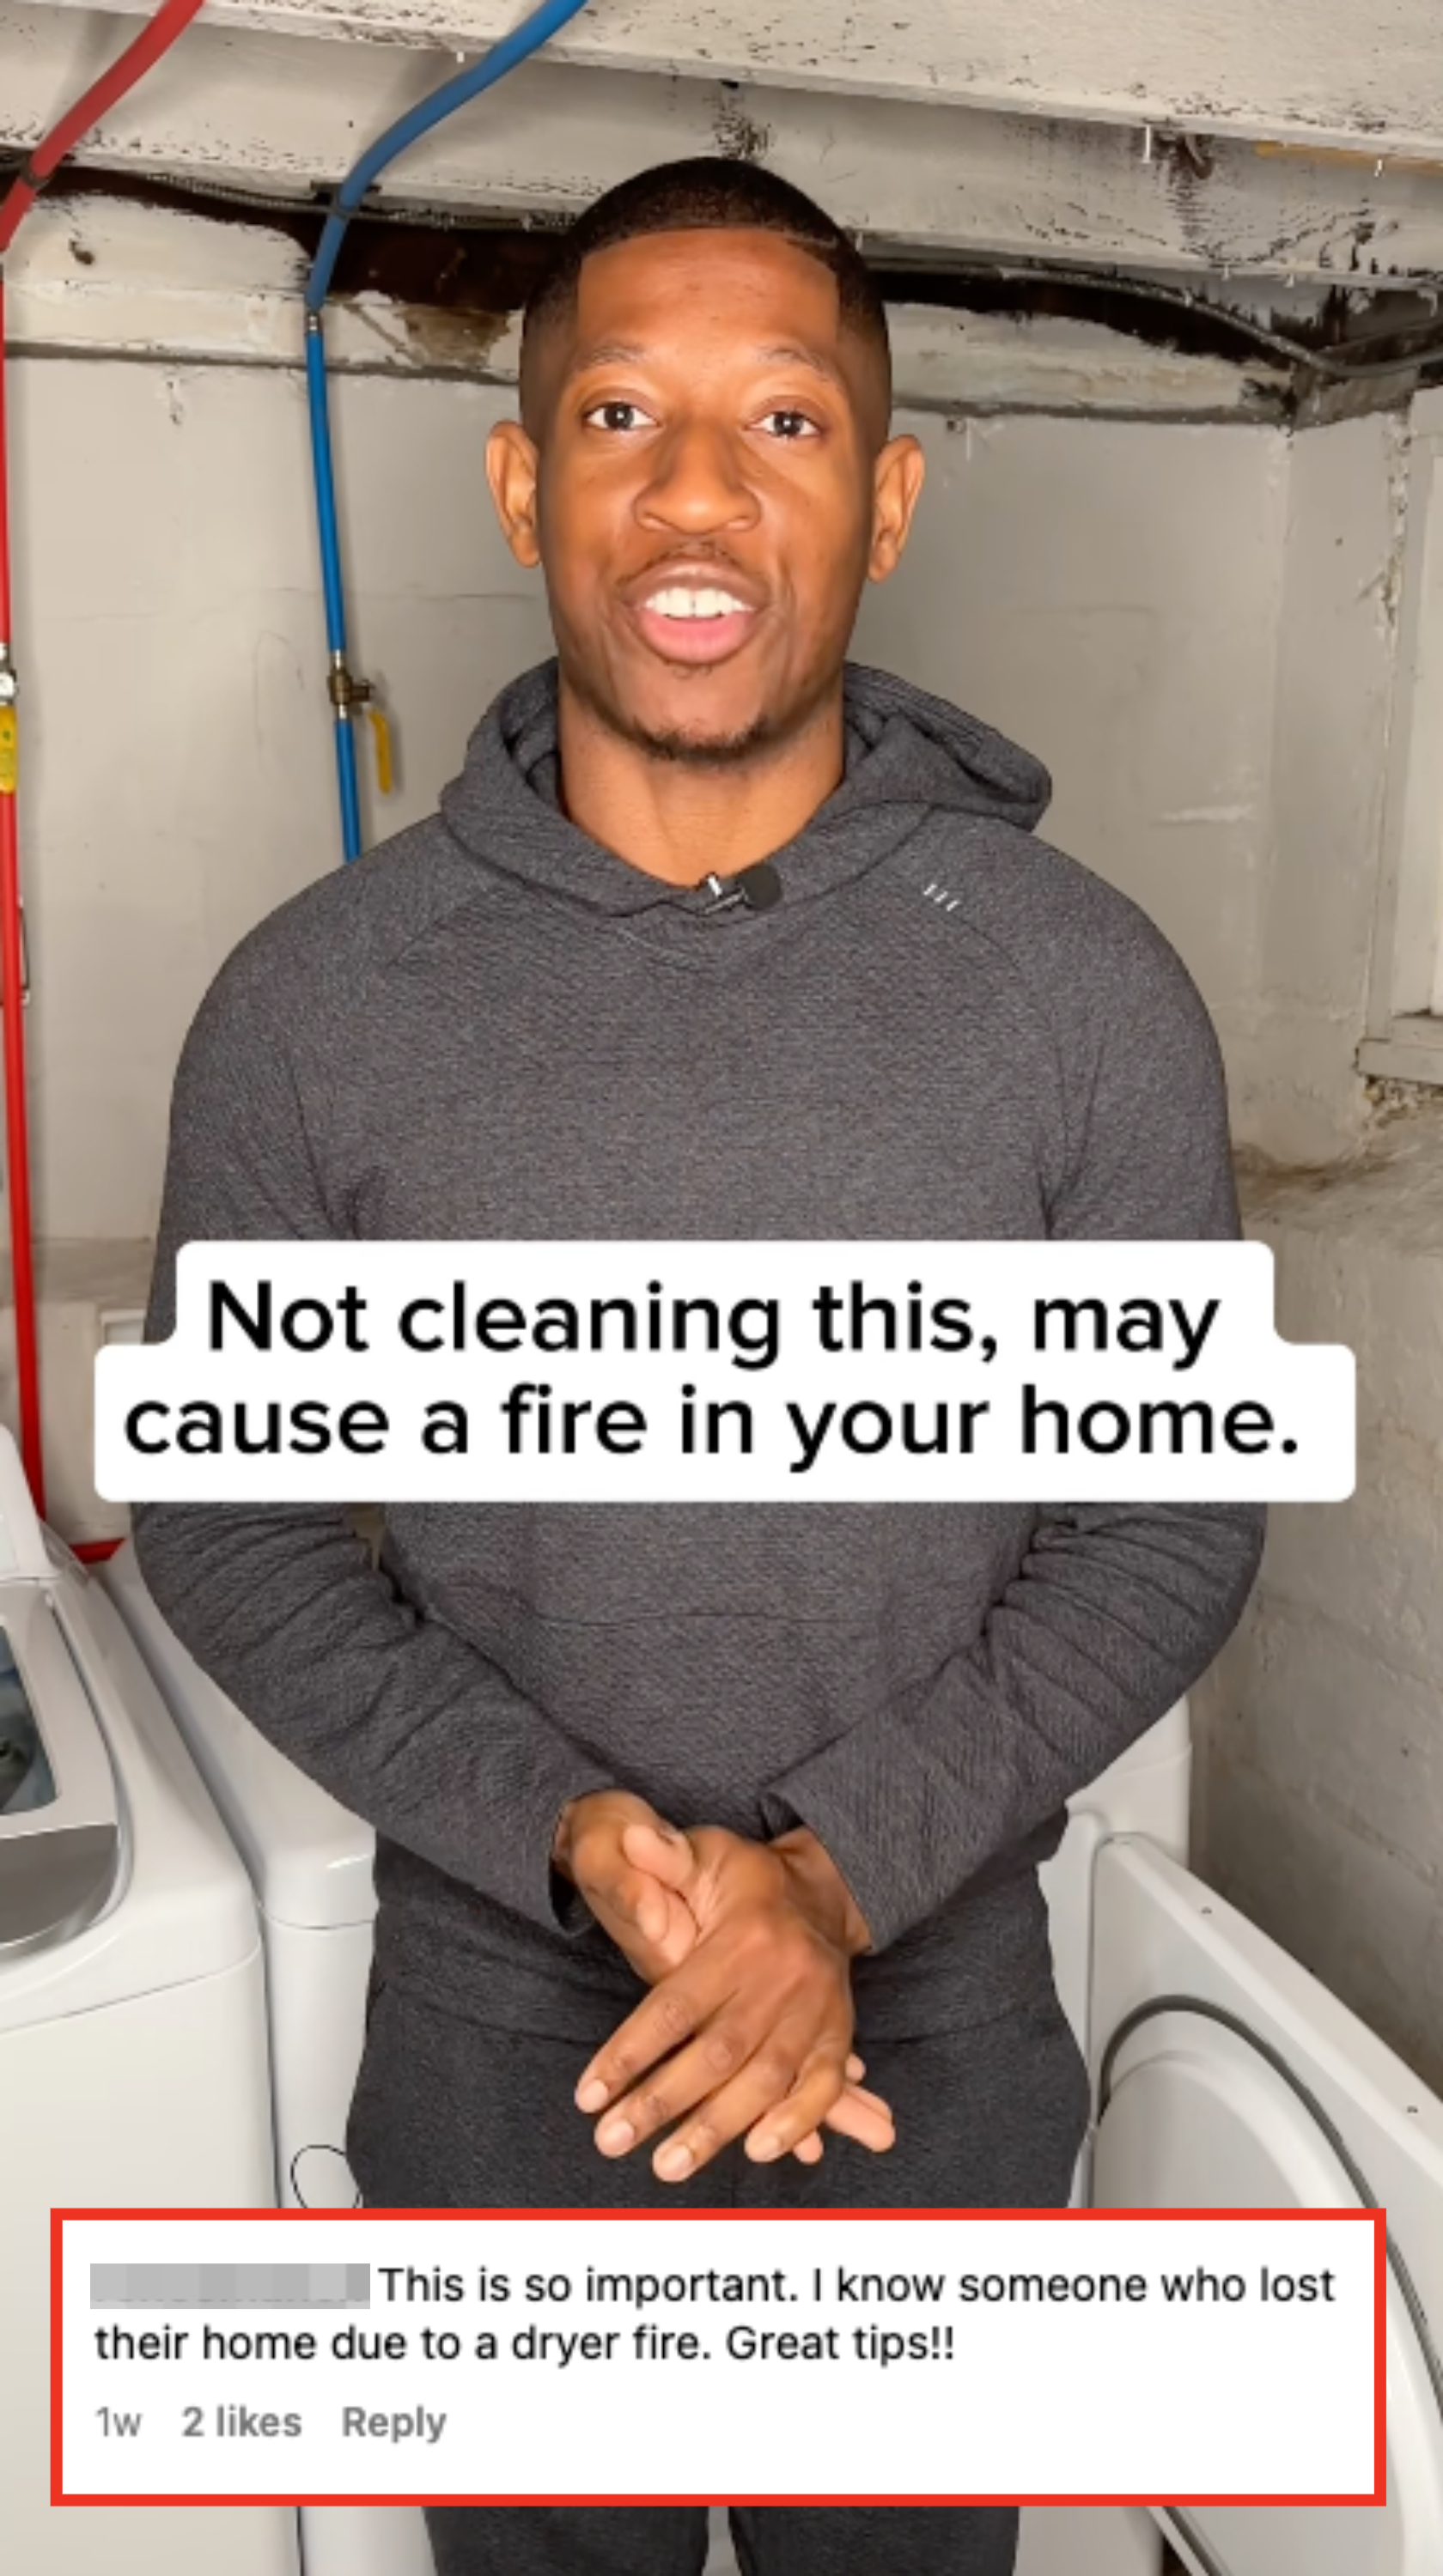 Kyshawn saying &quot;Not cleaning this may cause a fire in your home&quot; and standing in front of a washing machine